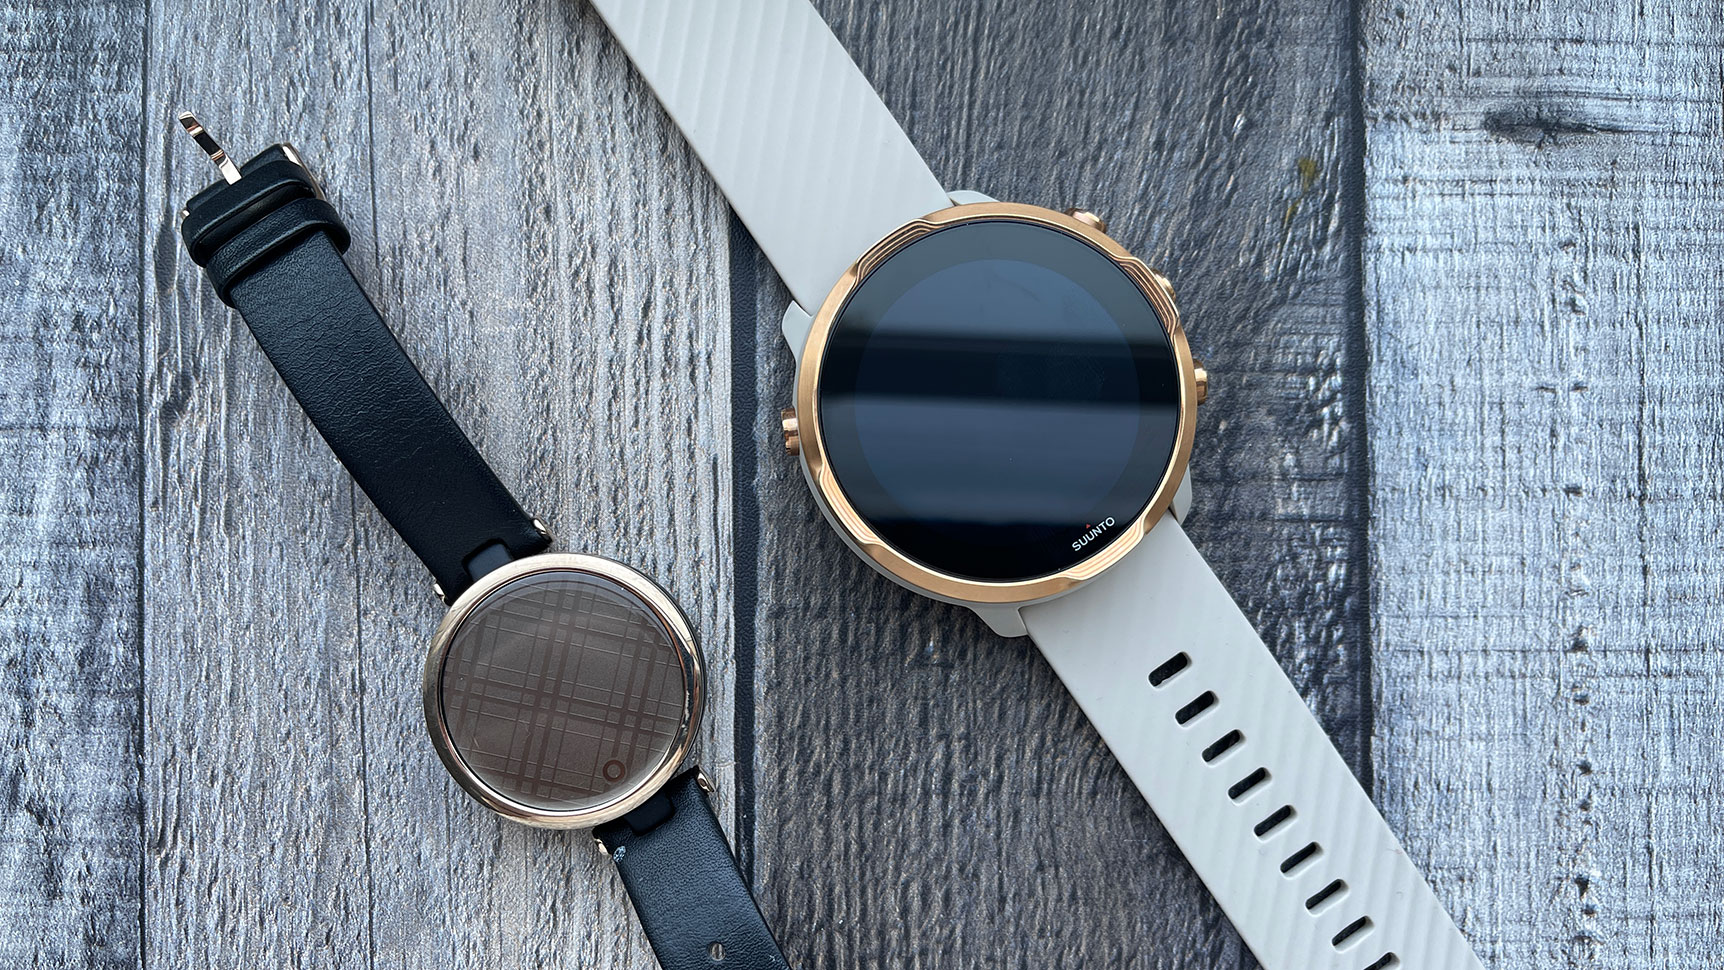 The Garmin Lily is the smallest smartwatch I've tested. The Suunto 7 is the largest. Look at that massive size difference! (Photo: Victoria Song/Gizmodo)